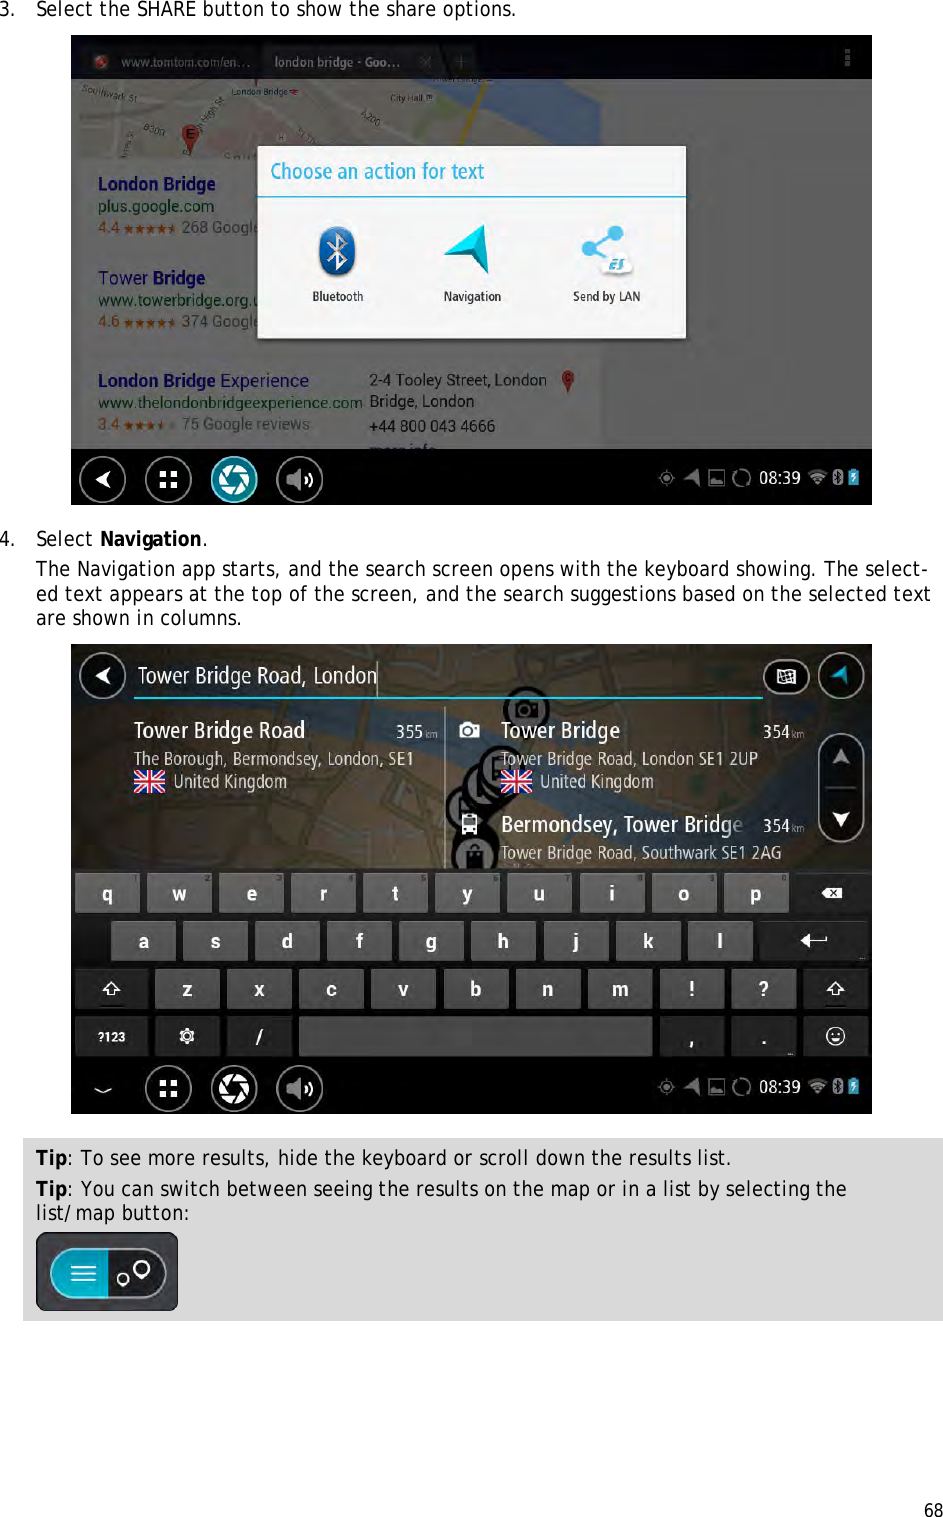  68  3. Select the SHARE button to show the share options.  4. Select Navigation. The Navigation app starts, and the search screen opens with the keyboard showing. The select-ed text appears at the top of the screen, and the search suggestions based on the selected text are shown in columns.  Tip: To see more results, hide the keyboard or scroll down the results list. Tip: You can switch between seeing the results on the map or in a list by selecting the list/map button:   